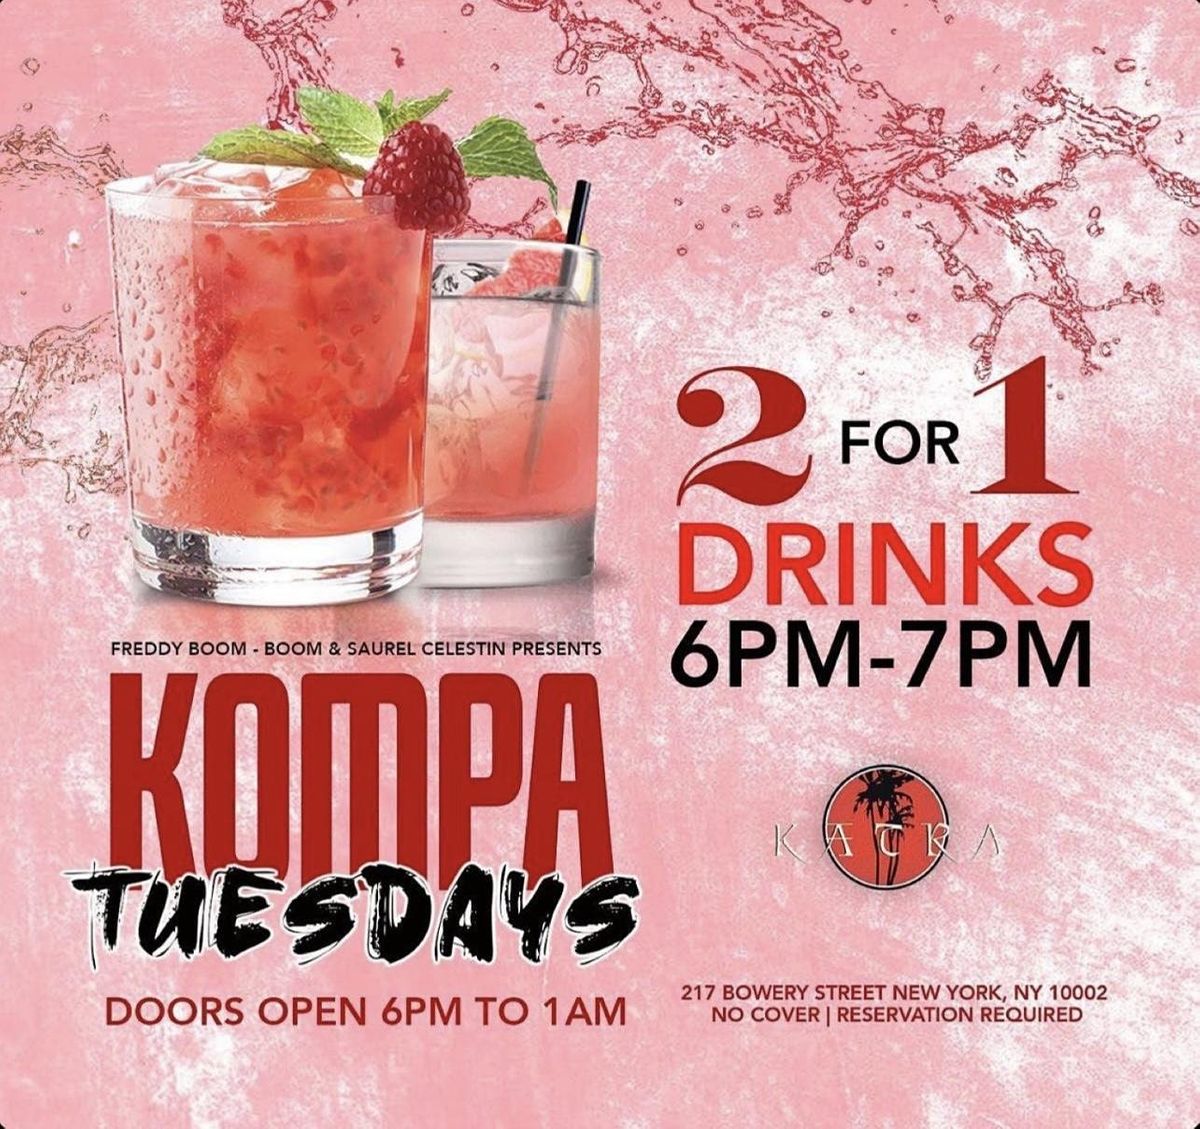 KOMPA TUESDAYS NUMBER 1 HAITIAN PARTY IN NEW YORK CITY